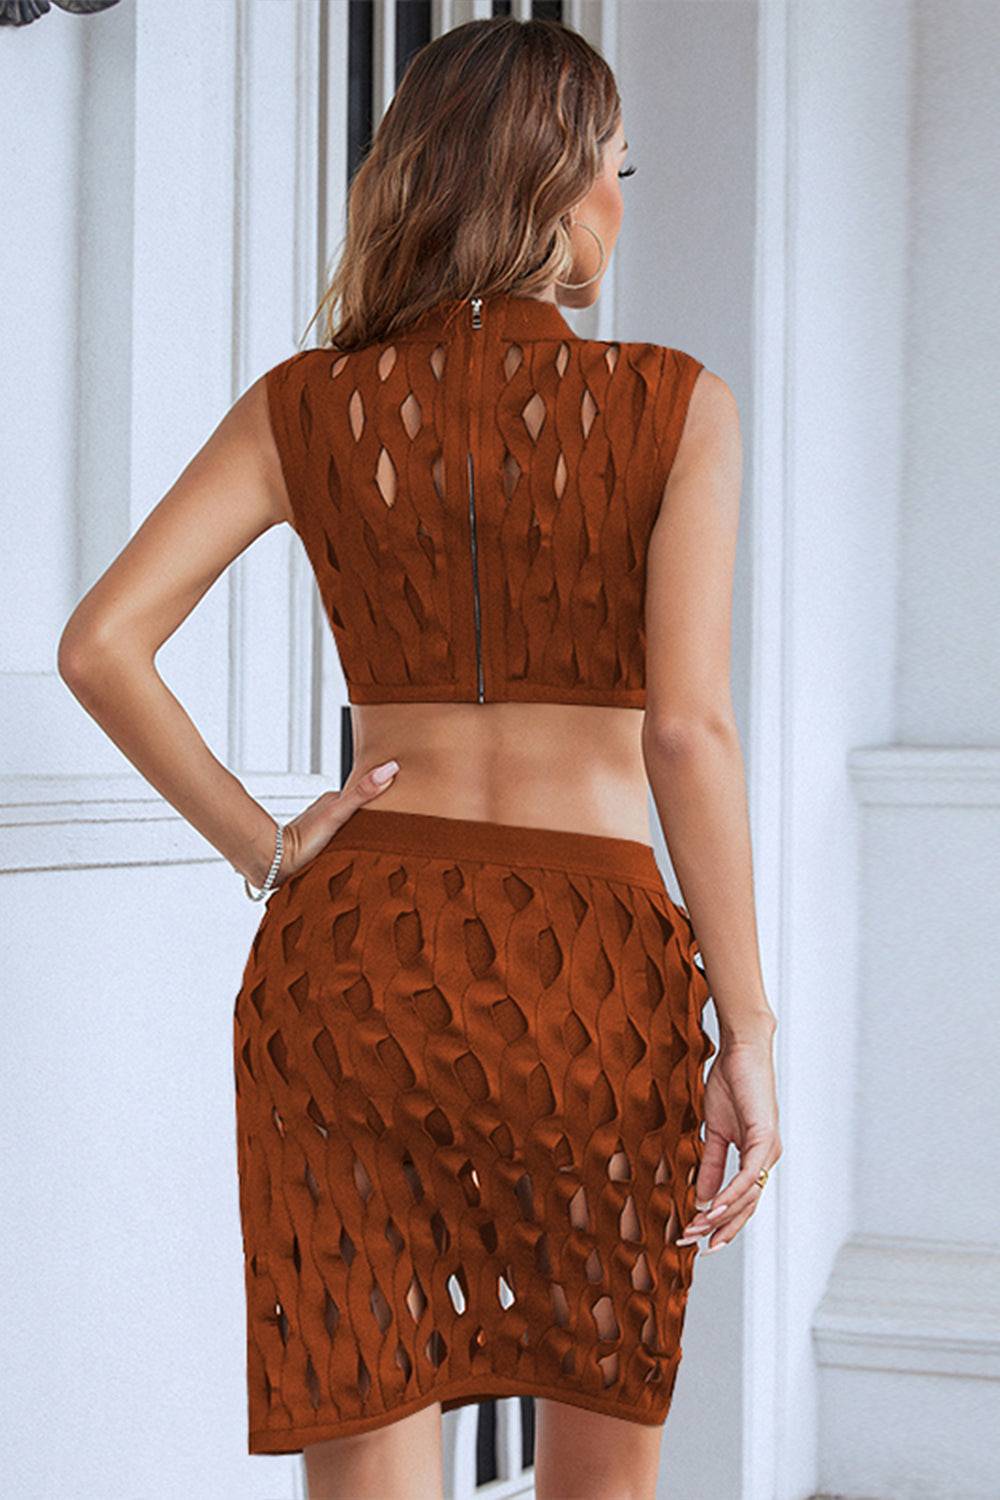 Sesidy-Labia Two Piece Set -Women's Clothing Online Store